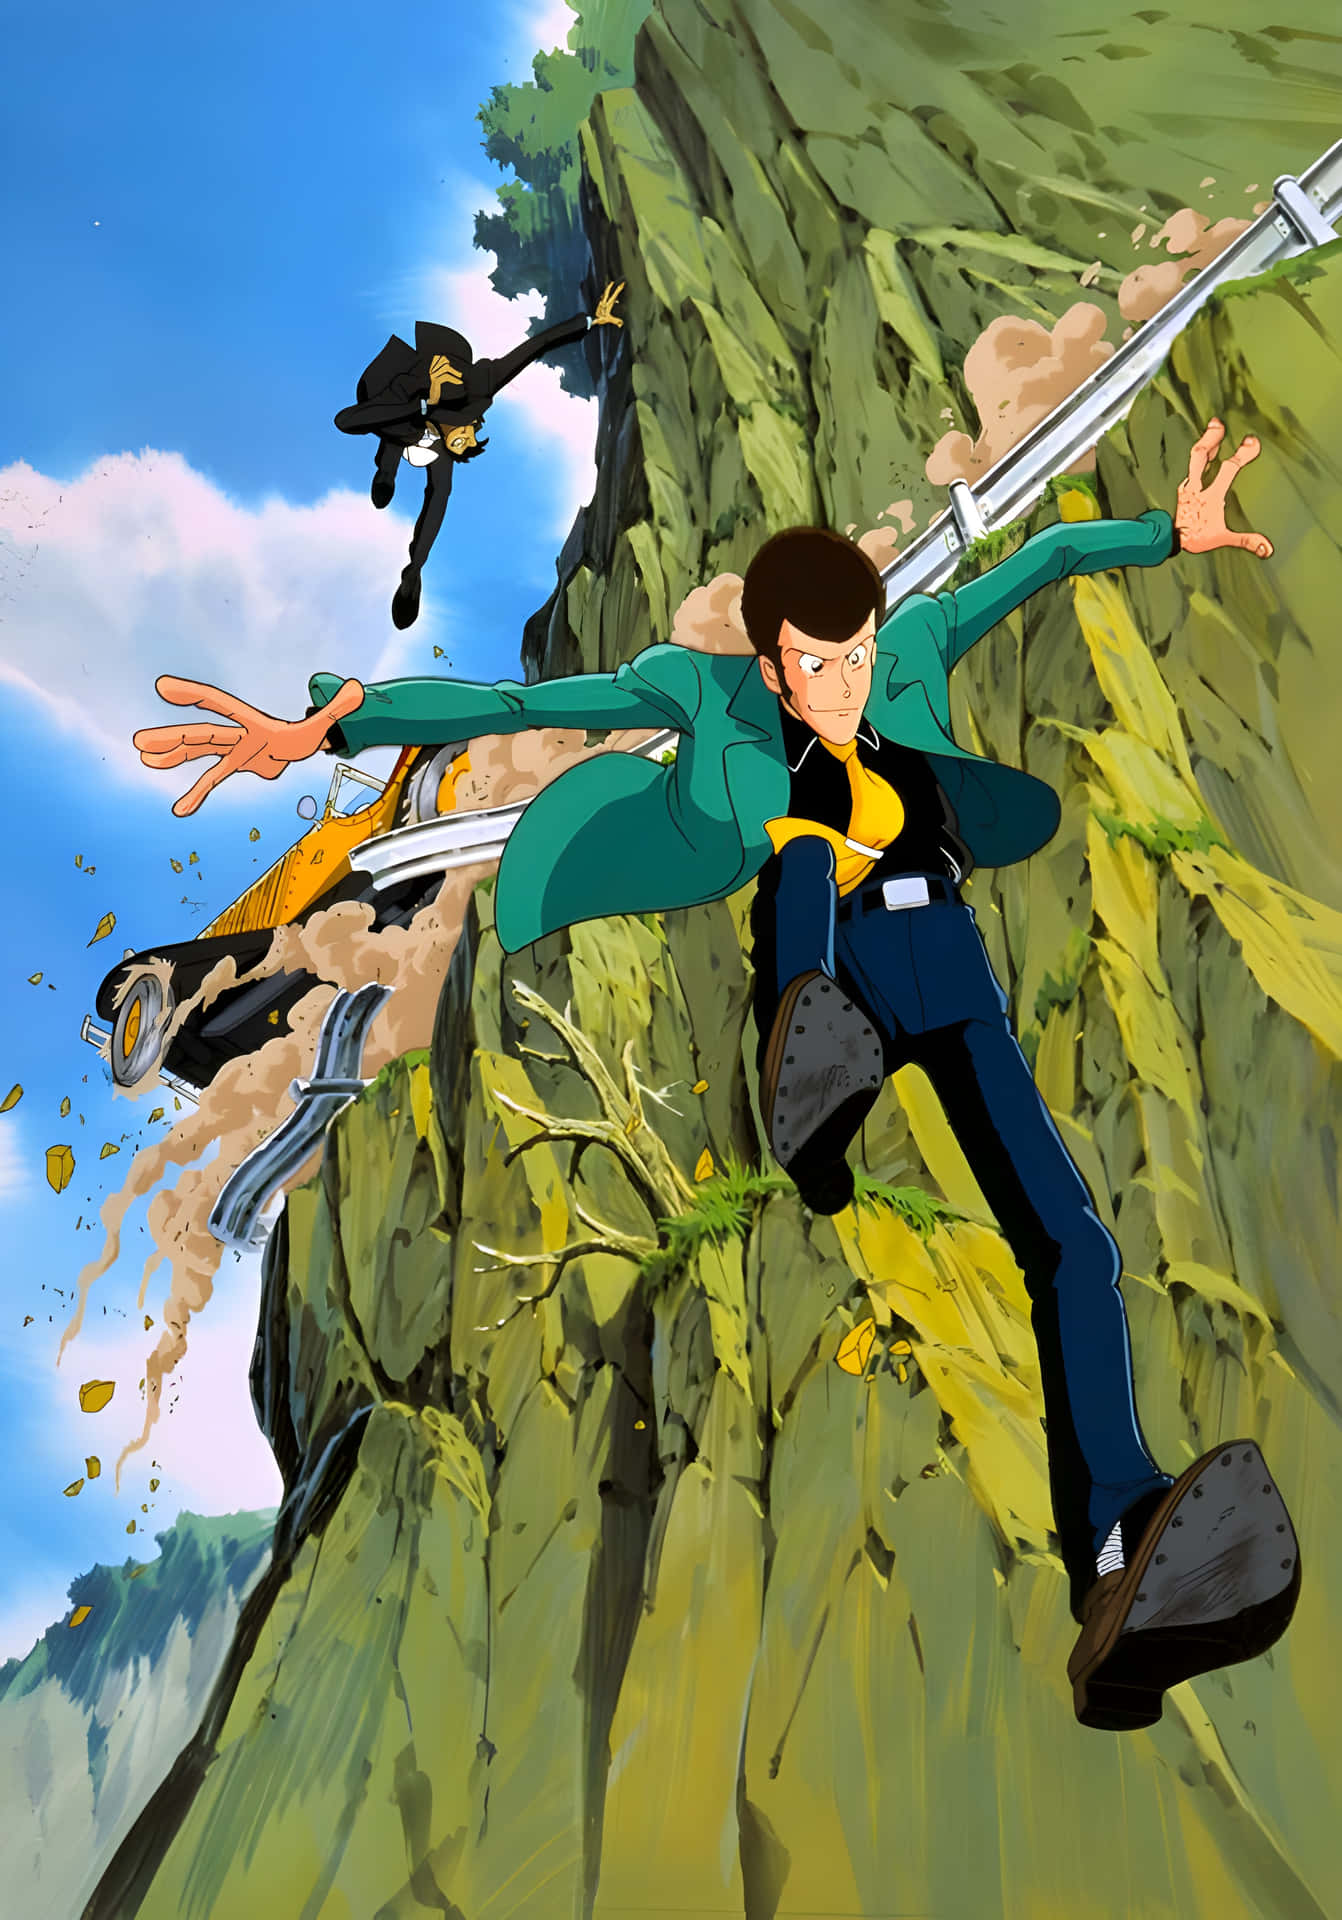 Caption: The Adventurous Trio from Lupin III Wallpaper